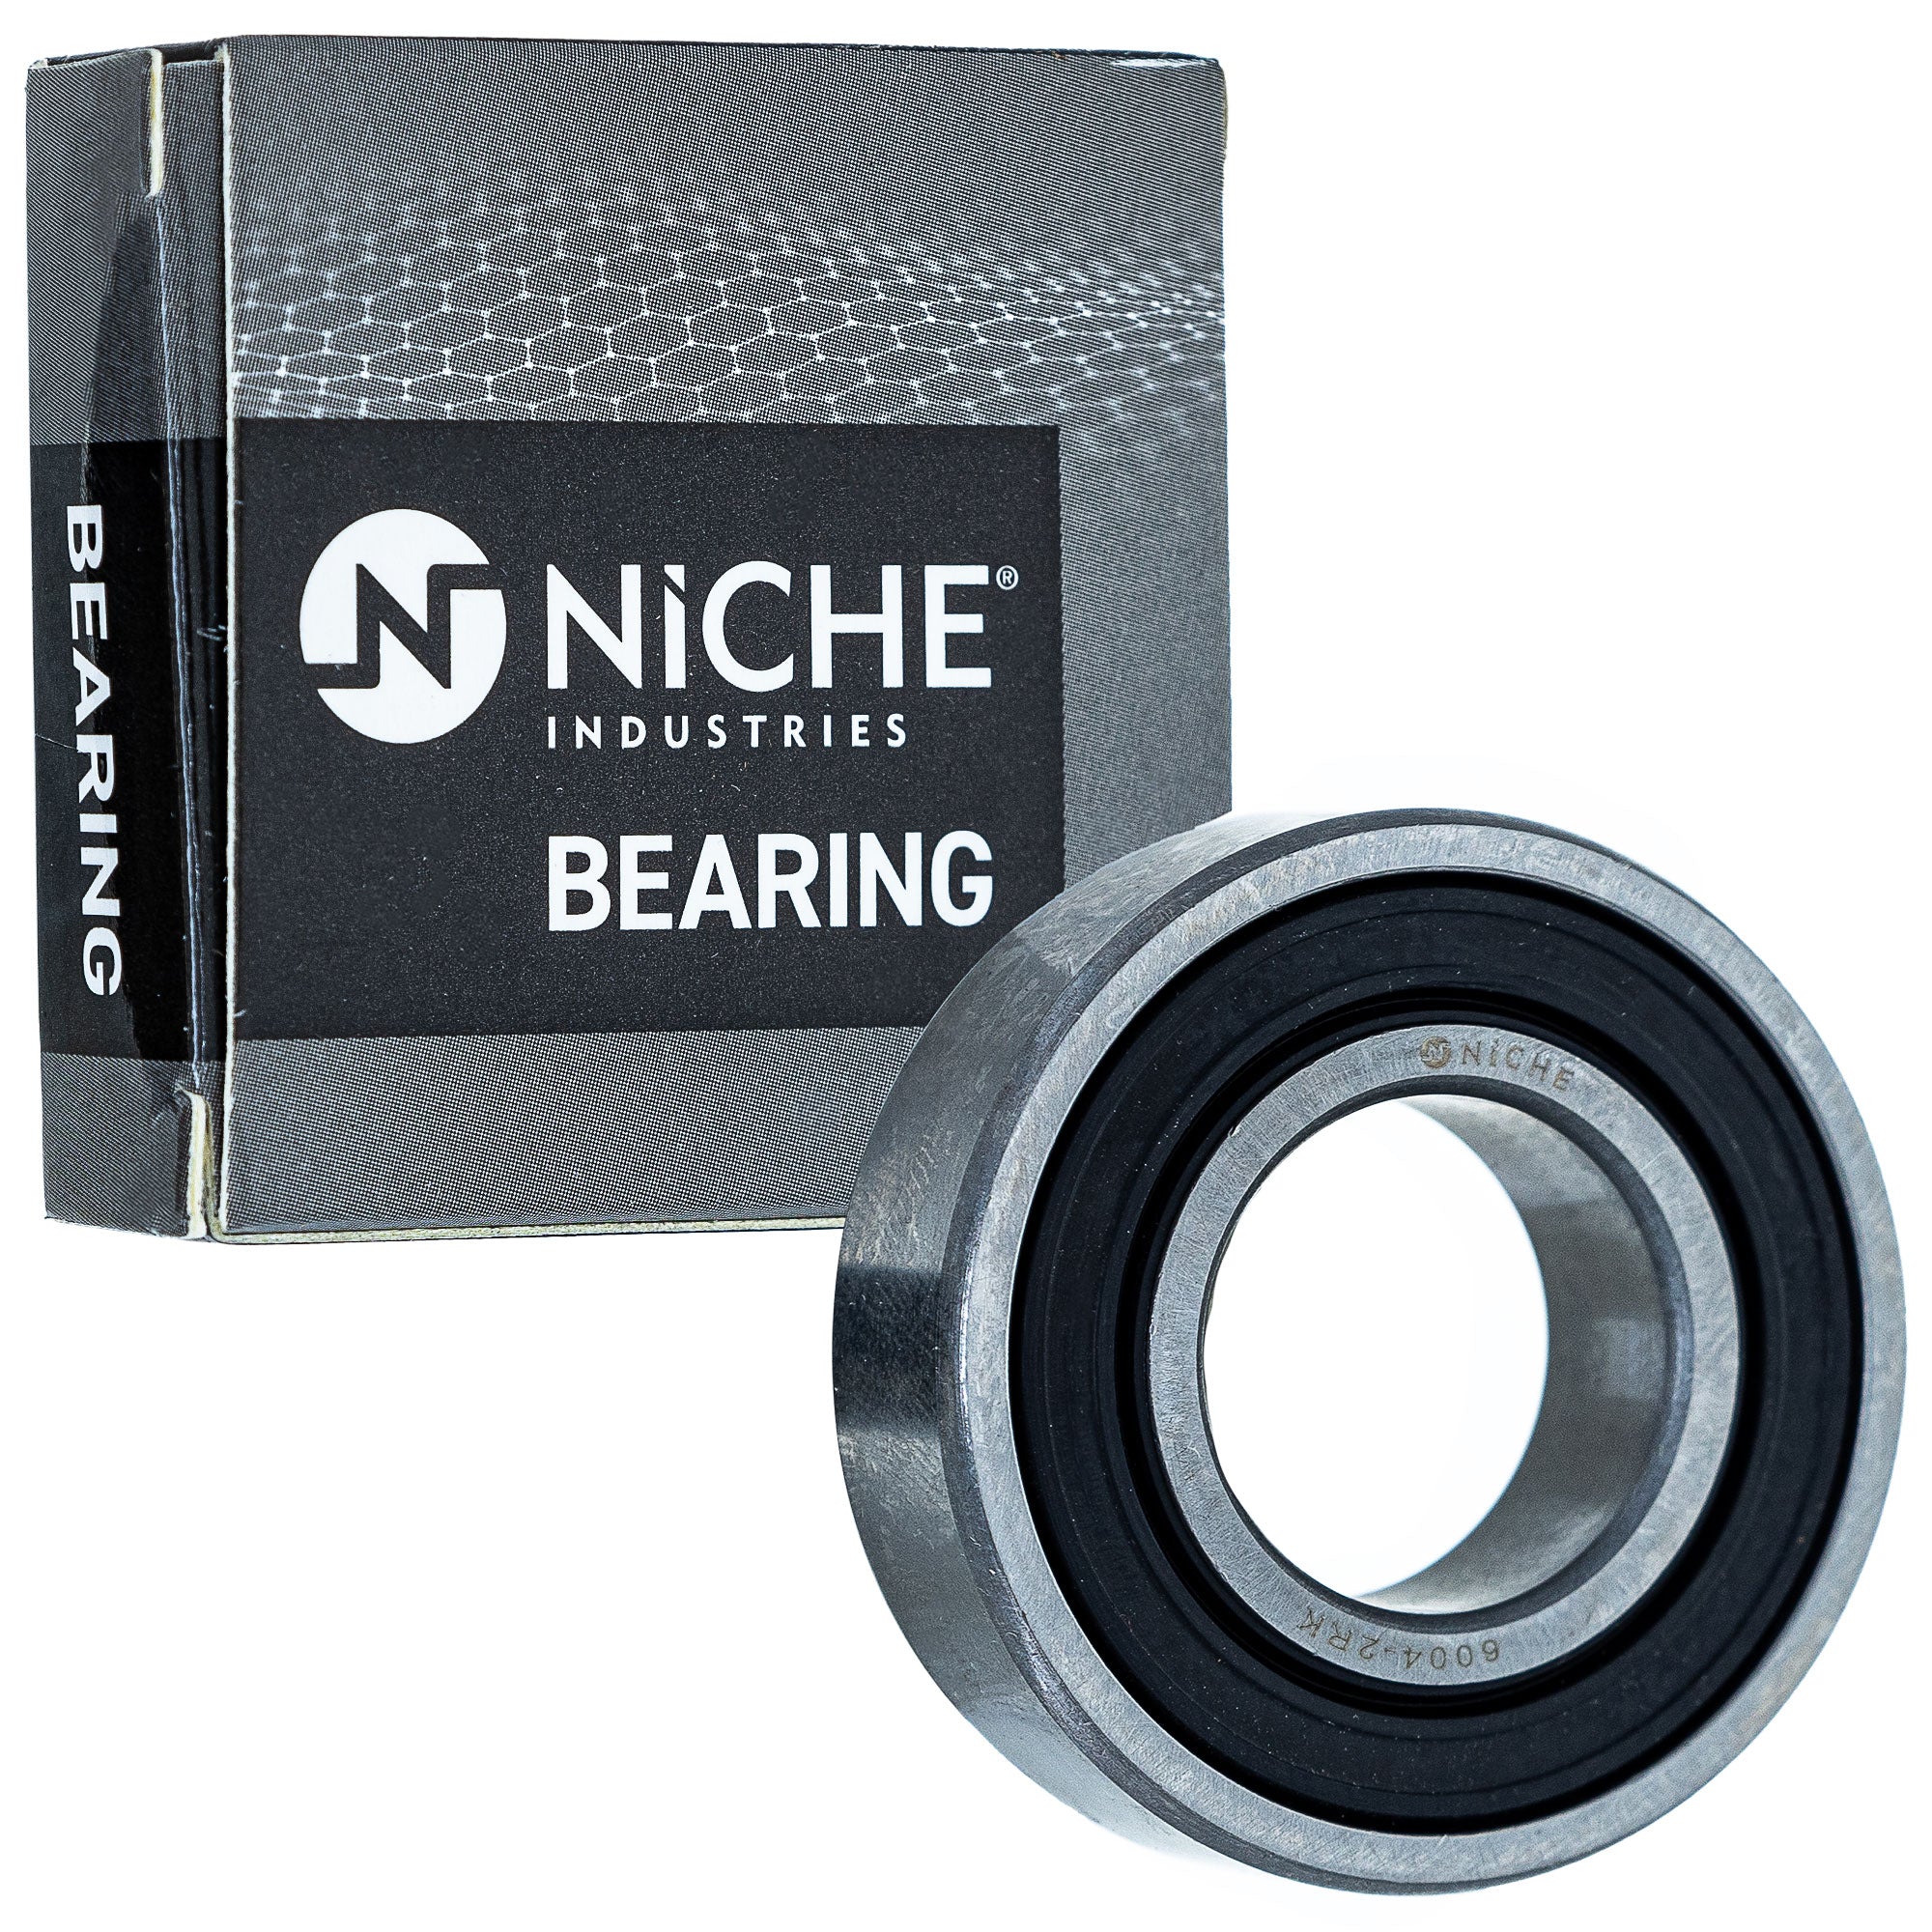 NICHE 519-CBB2295R Bearing 10-Pack for zOTHER YZ400F YZ250WR YZ250